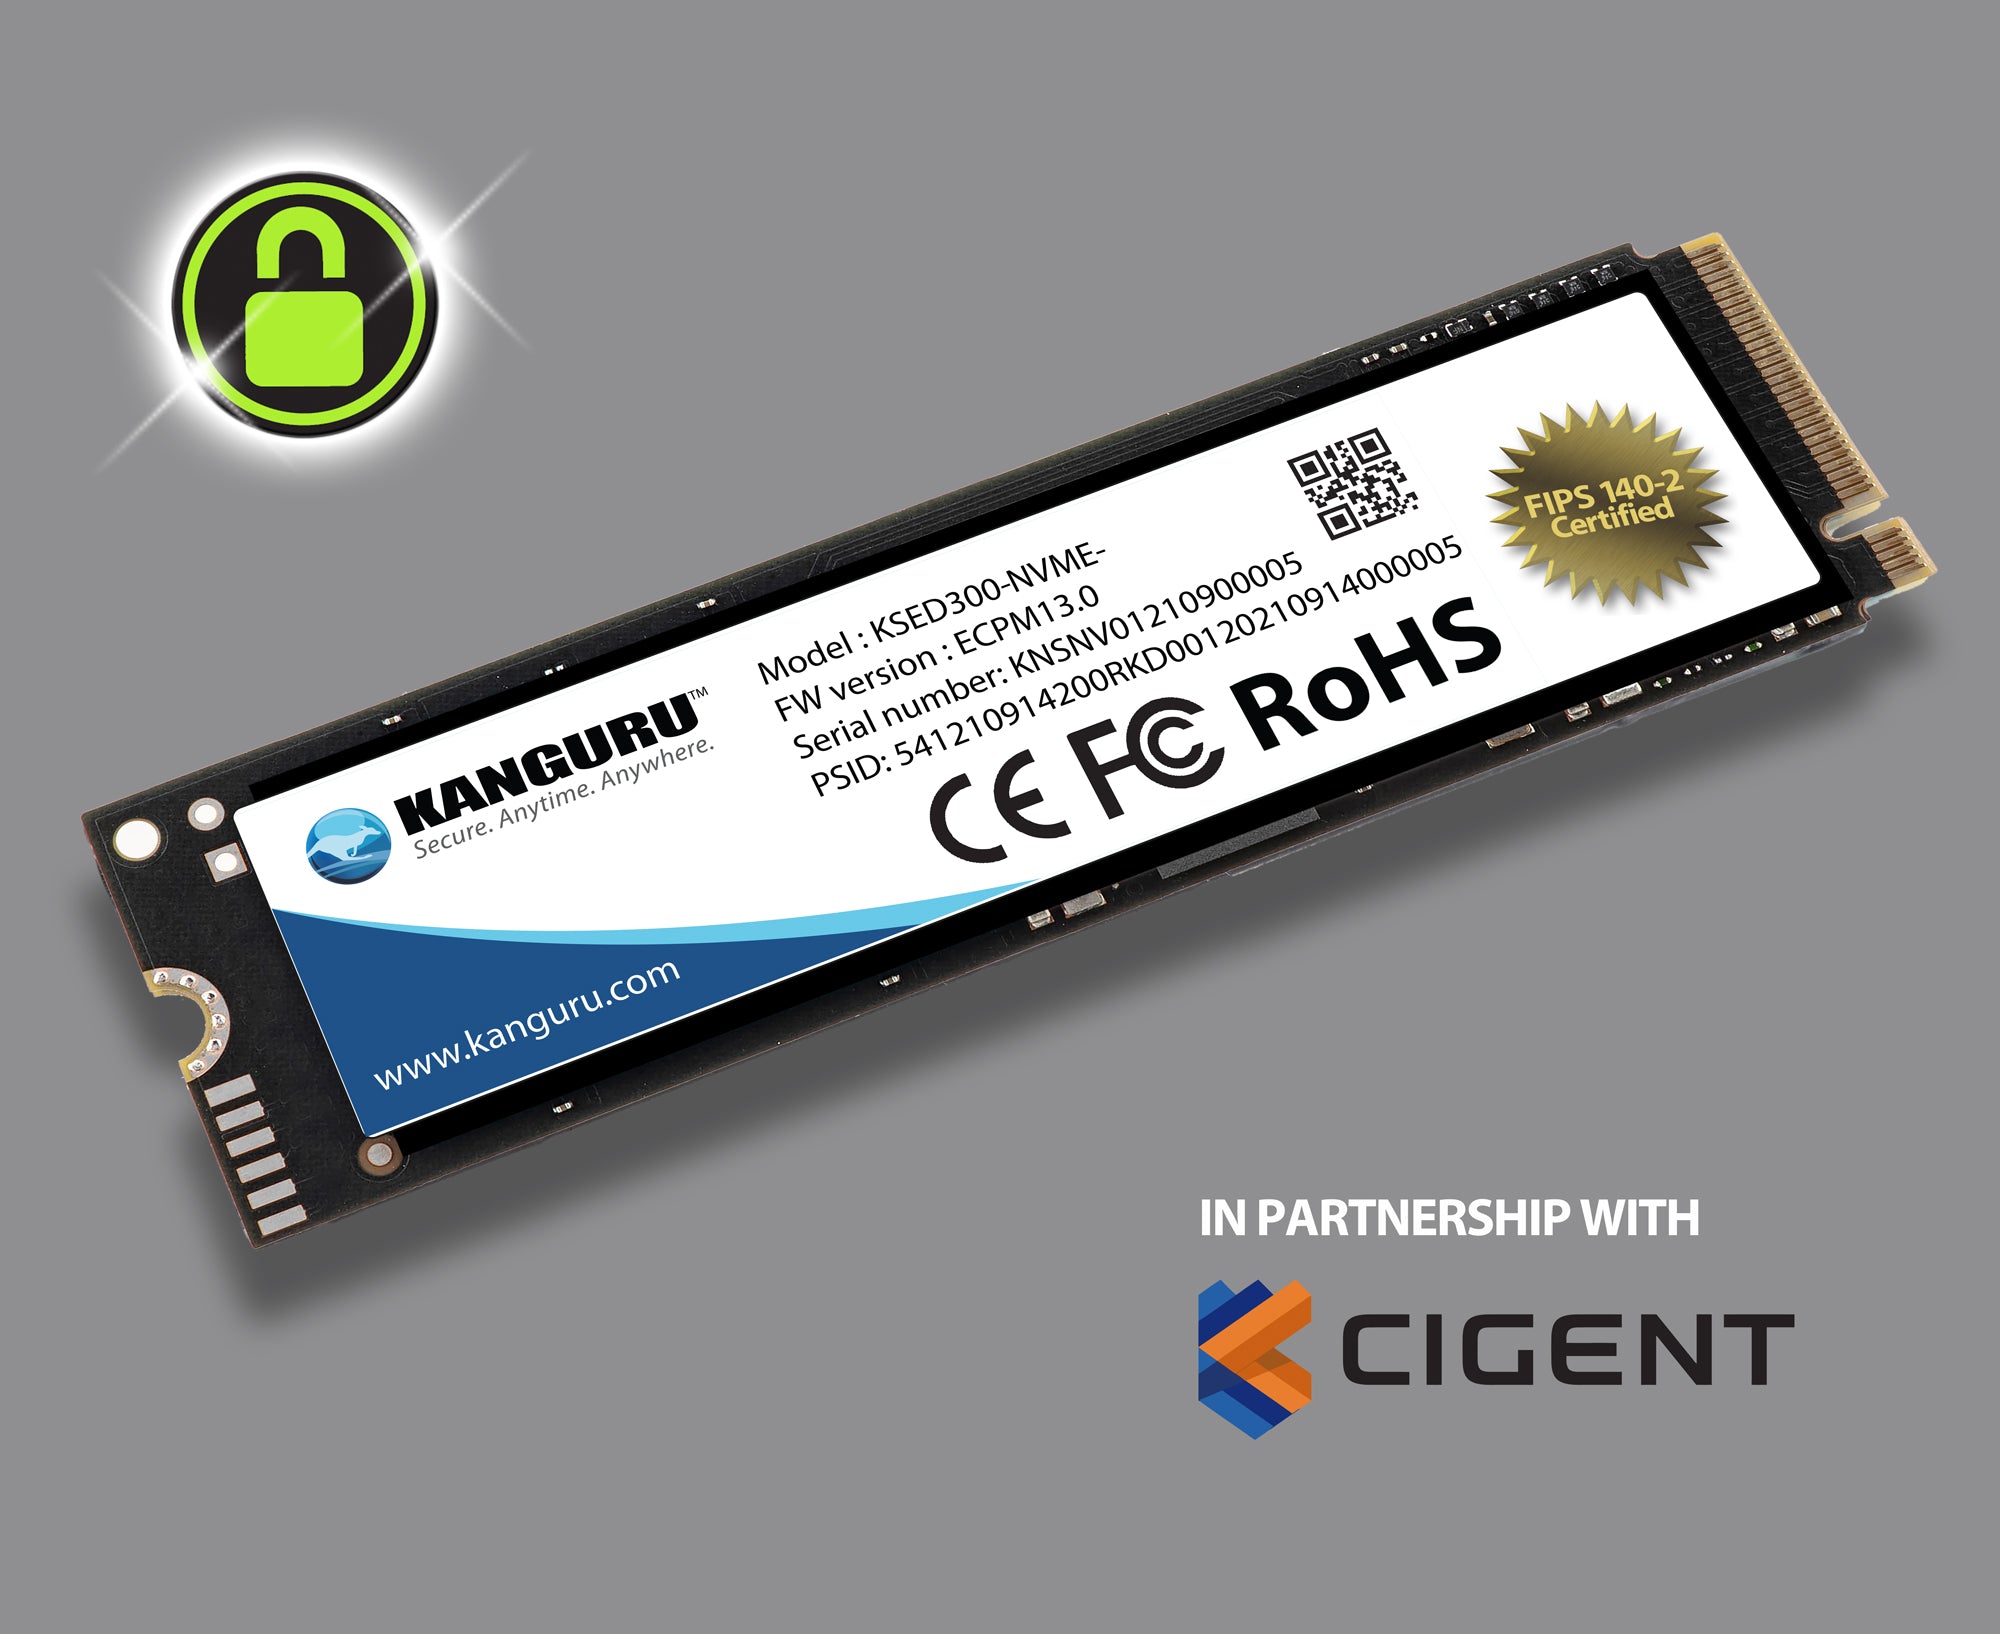 Kanguru has partnered with Cigent® Technology to provide the highest-level security for organizations with this exceptional self-encrypting SED data security solution. The FIPS 140-2 Certified, Kanguru Opal SED300™ with Kanguru Data Defense™ is a hardware-based self-encrypting drive that provides full disk data security at rest.